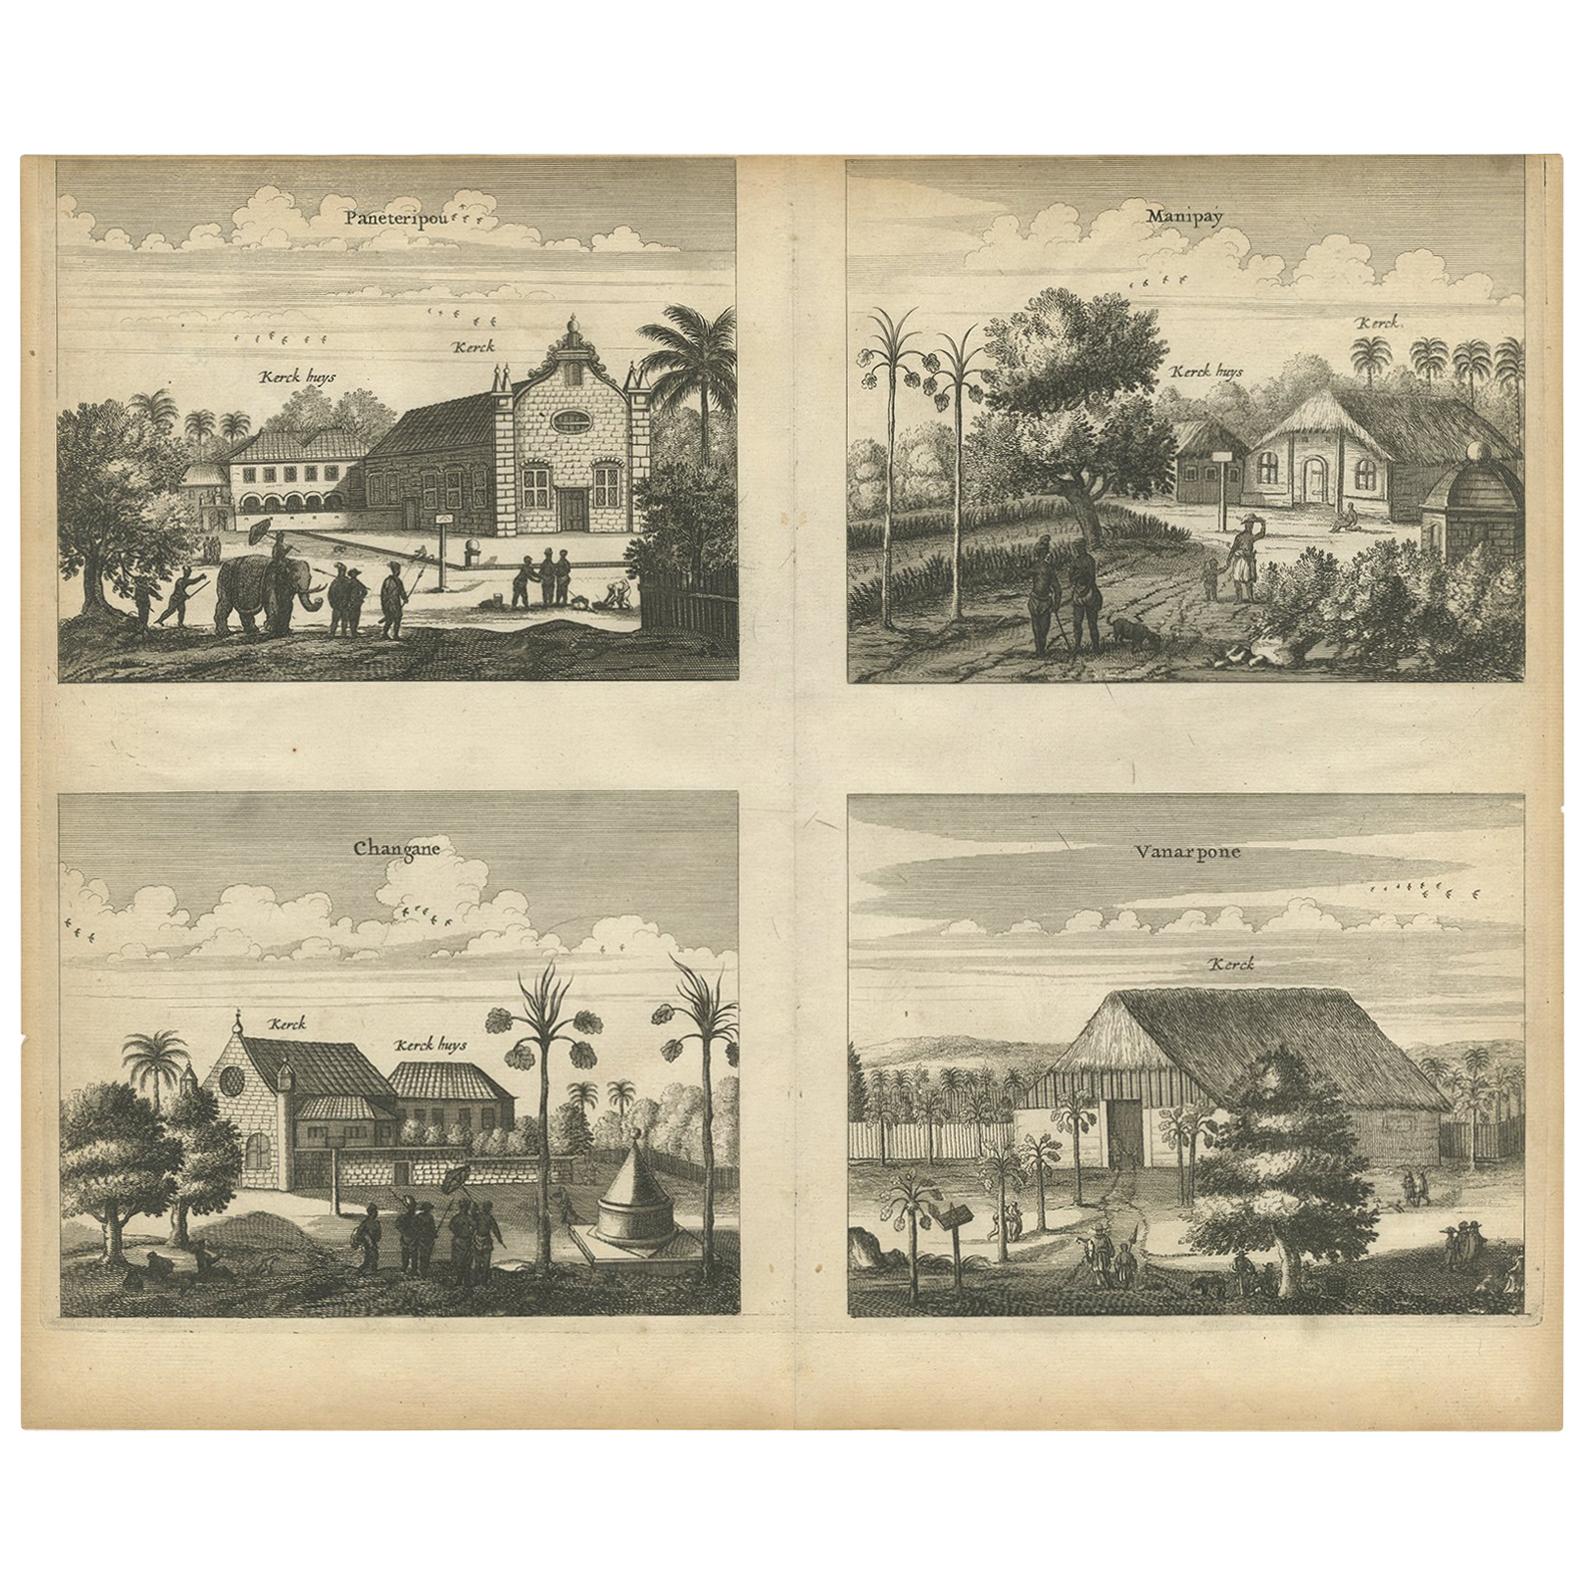 Antique Print of the Churches of Paneteripoum, Manipay, Changane and Vanarpone